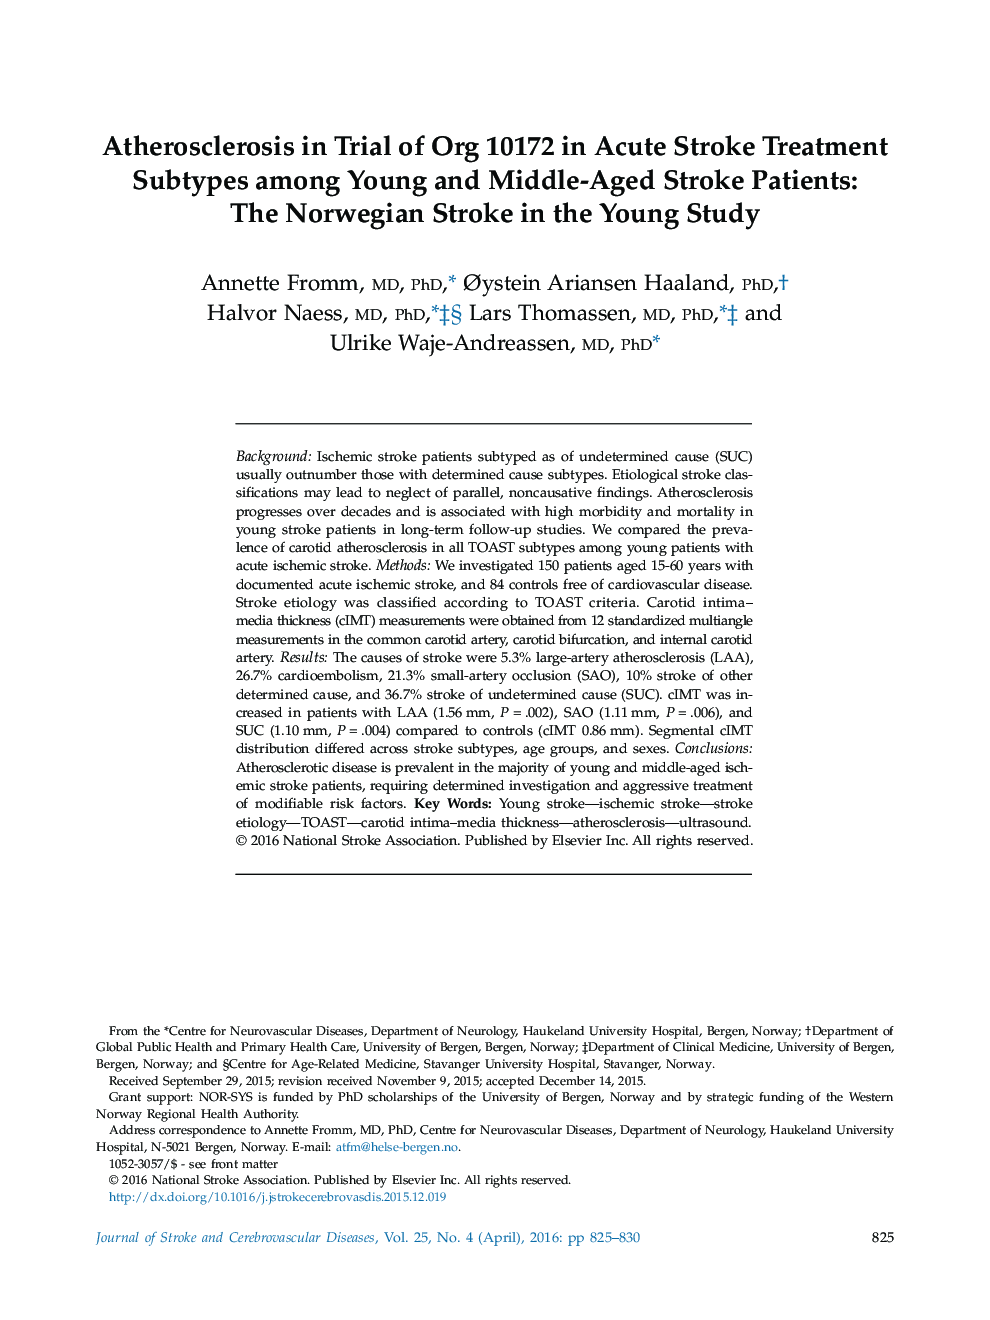 Atherosclerosis in Trial of Org 10172 in Acute Stroke Treatment Subtypes among Young and Middle-Aged Stroke Patients: The Norwegian Stroke in the Young Study 